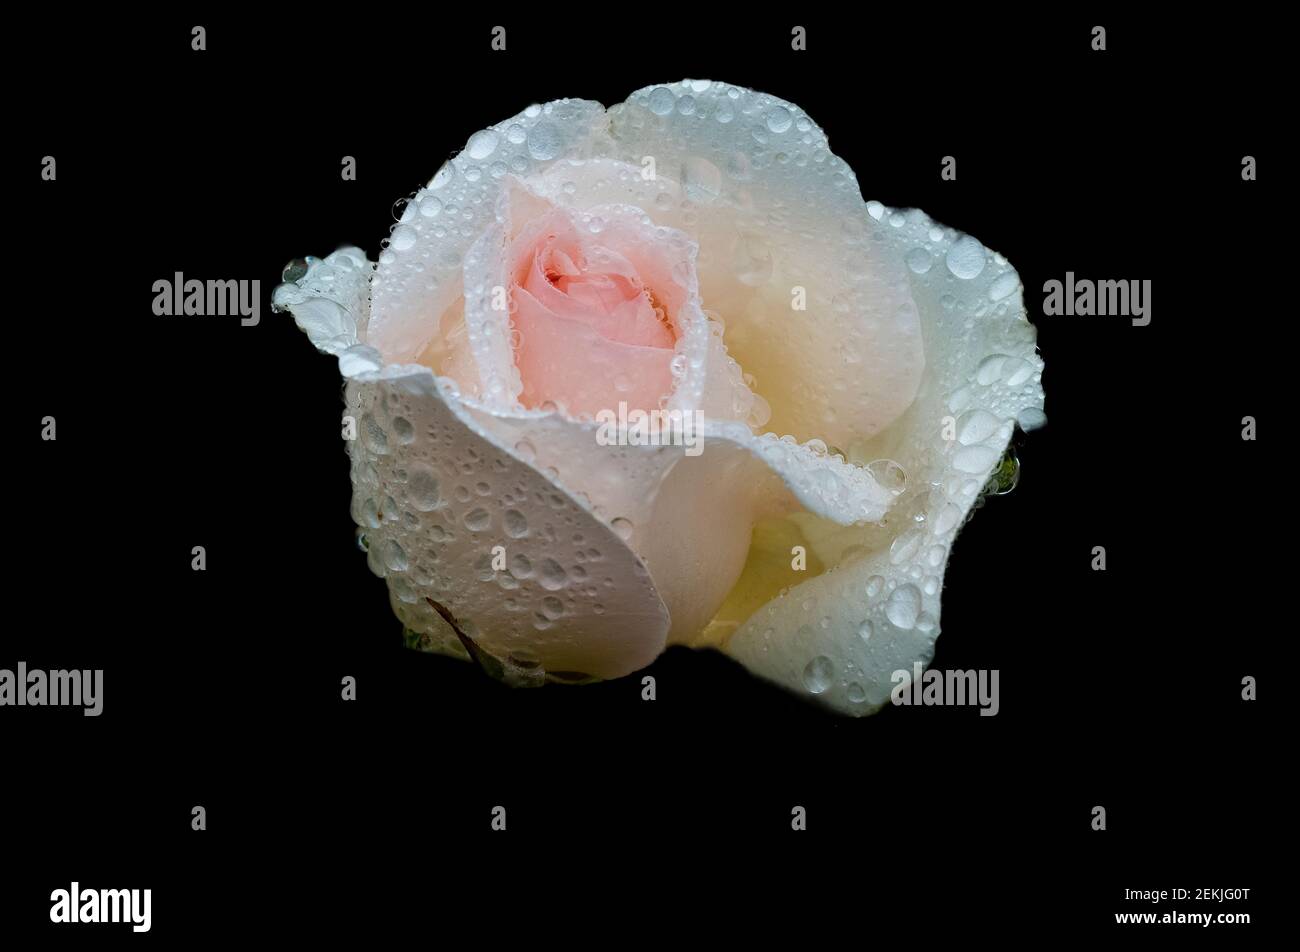 Dew covered white and pink rose head in black background Stock Photo